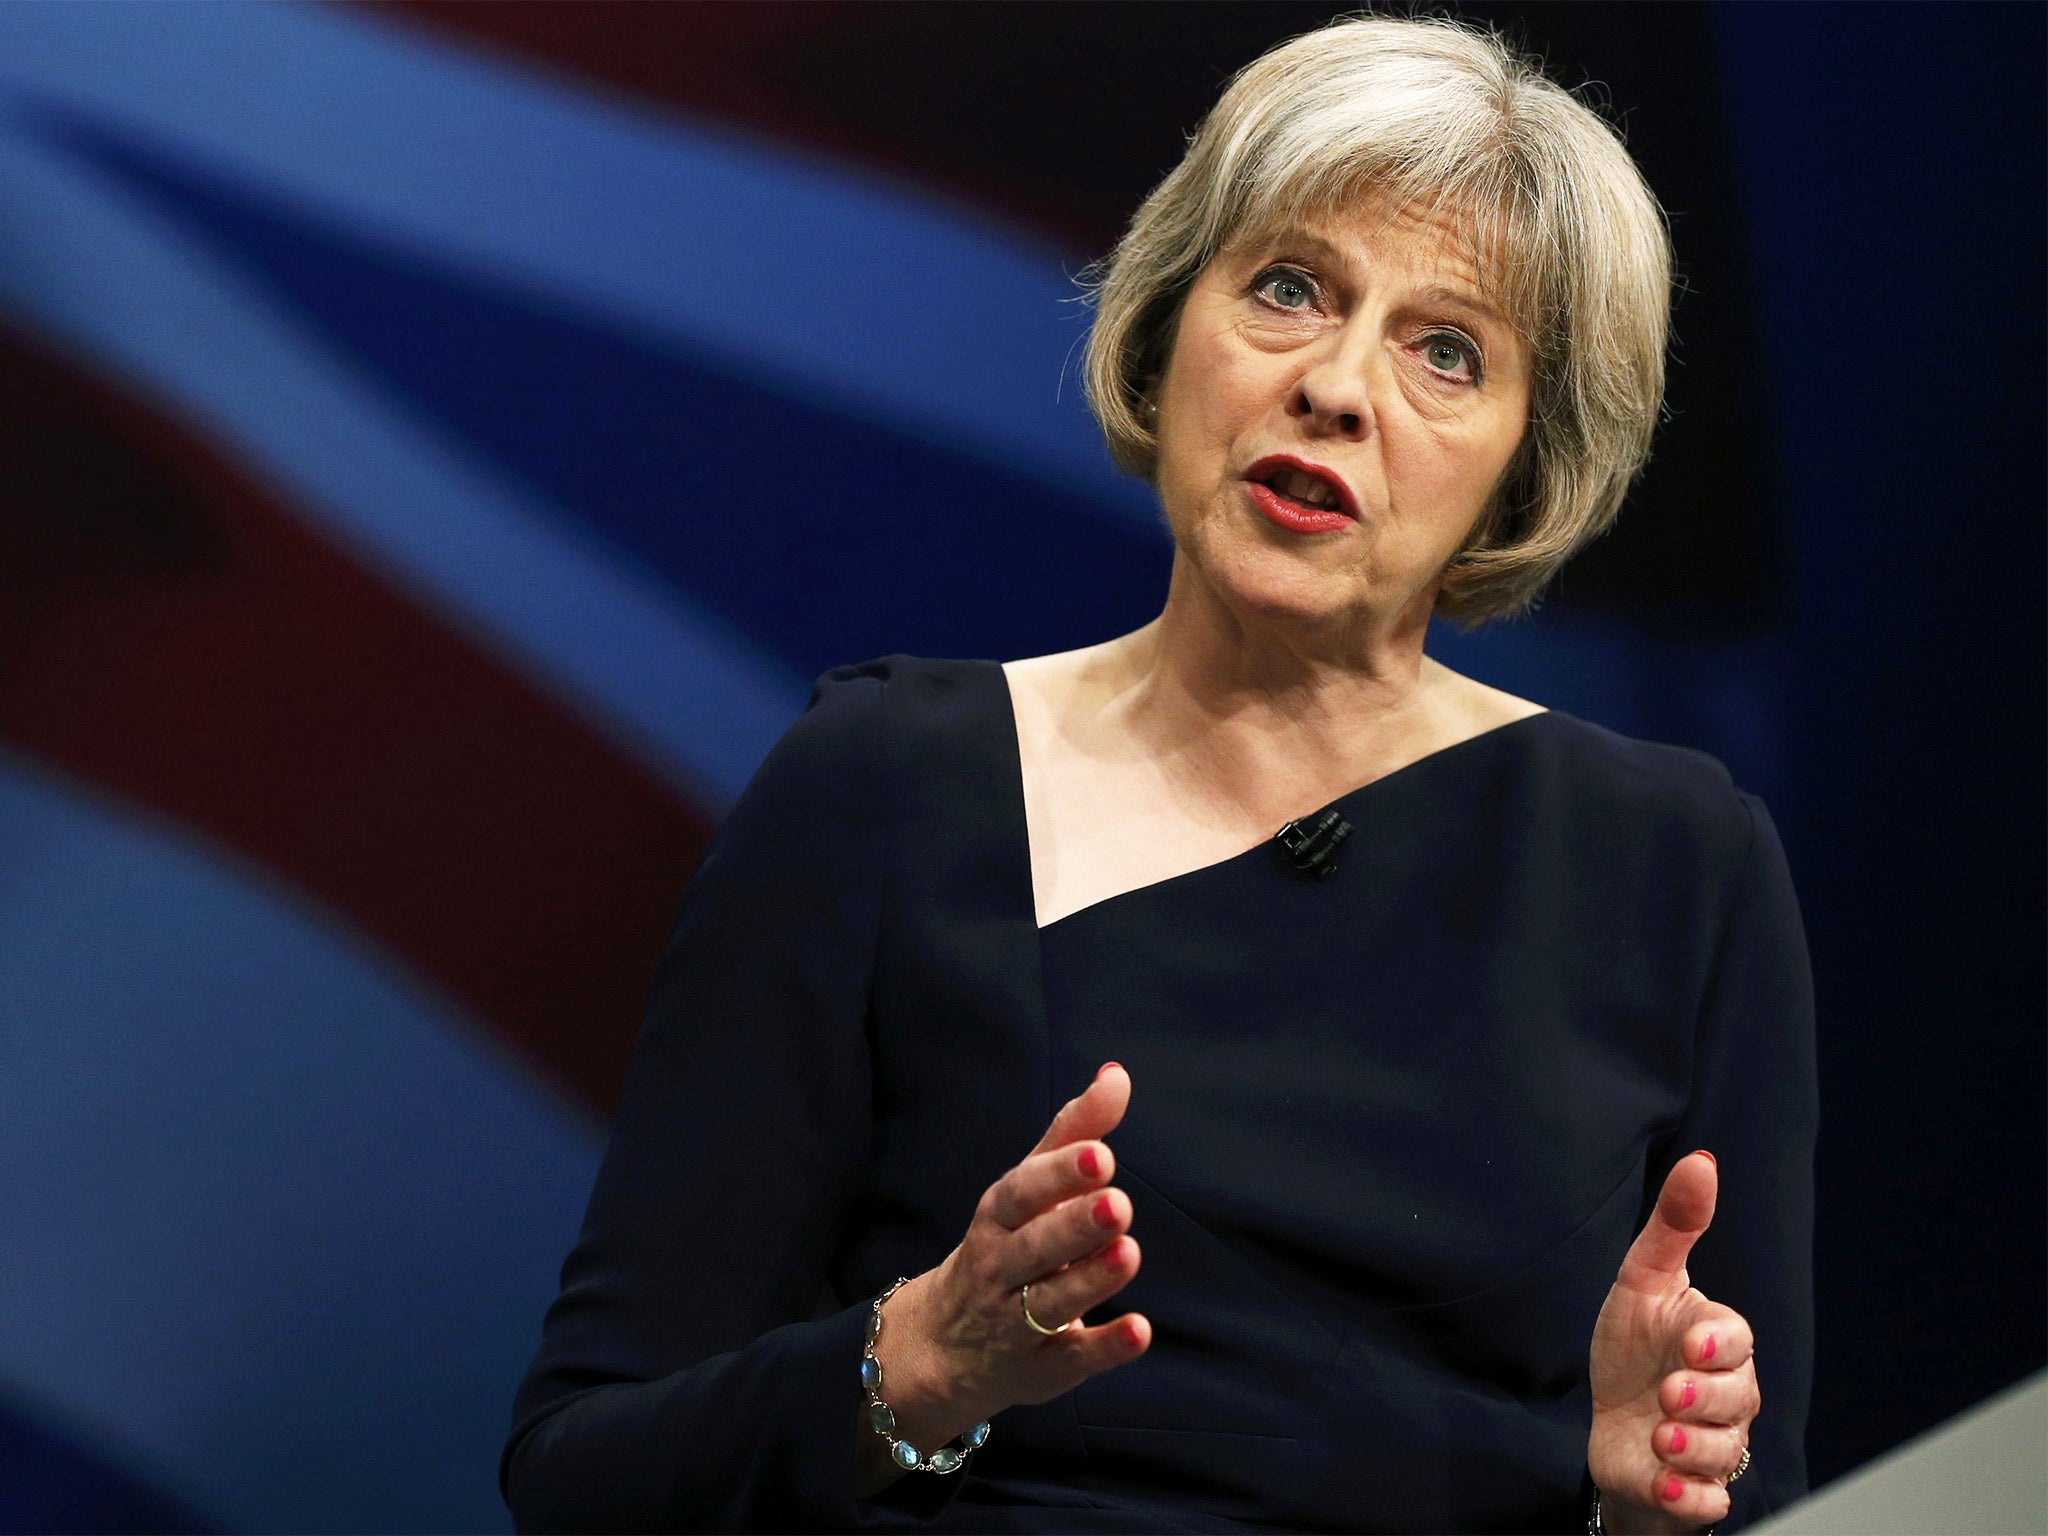 The Home Secretary, Theresa May, told the Tory conference that Britain did not need large numbers of migrant workers